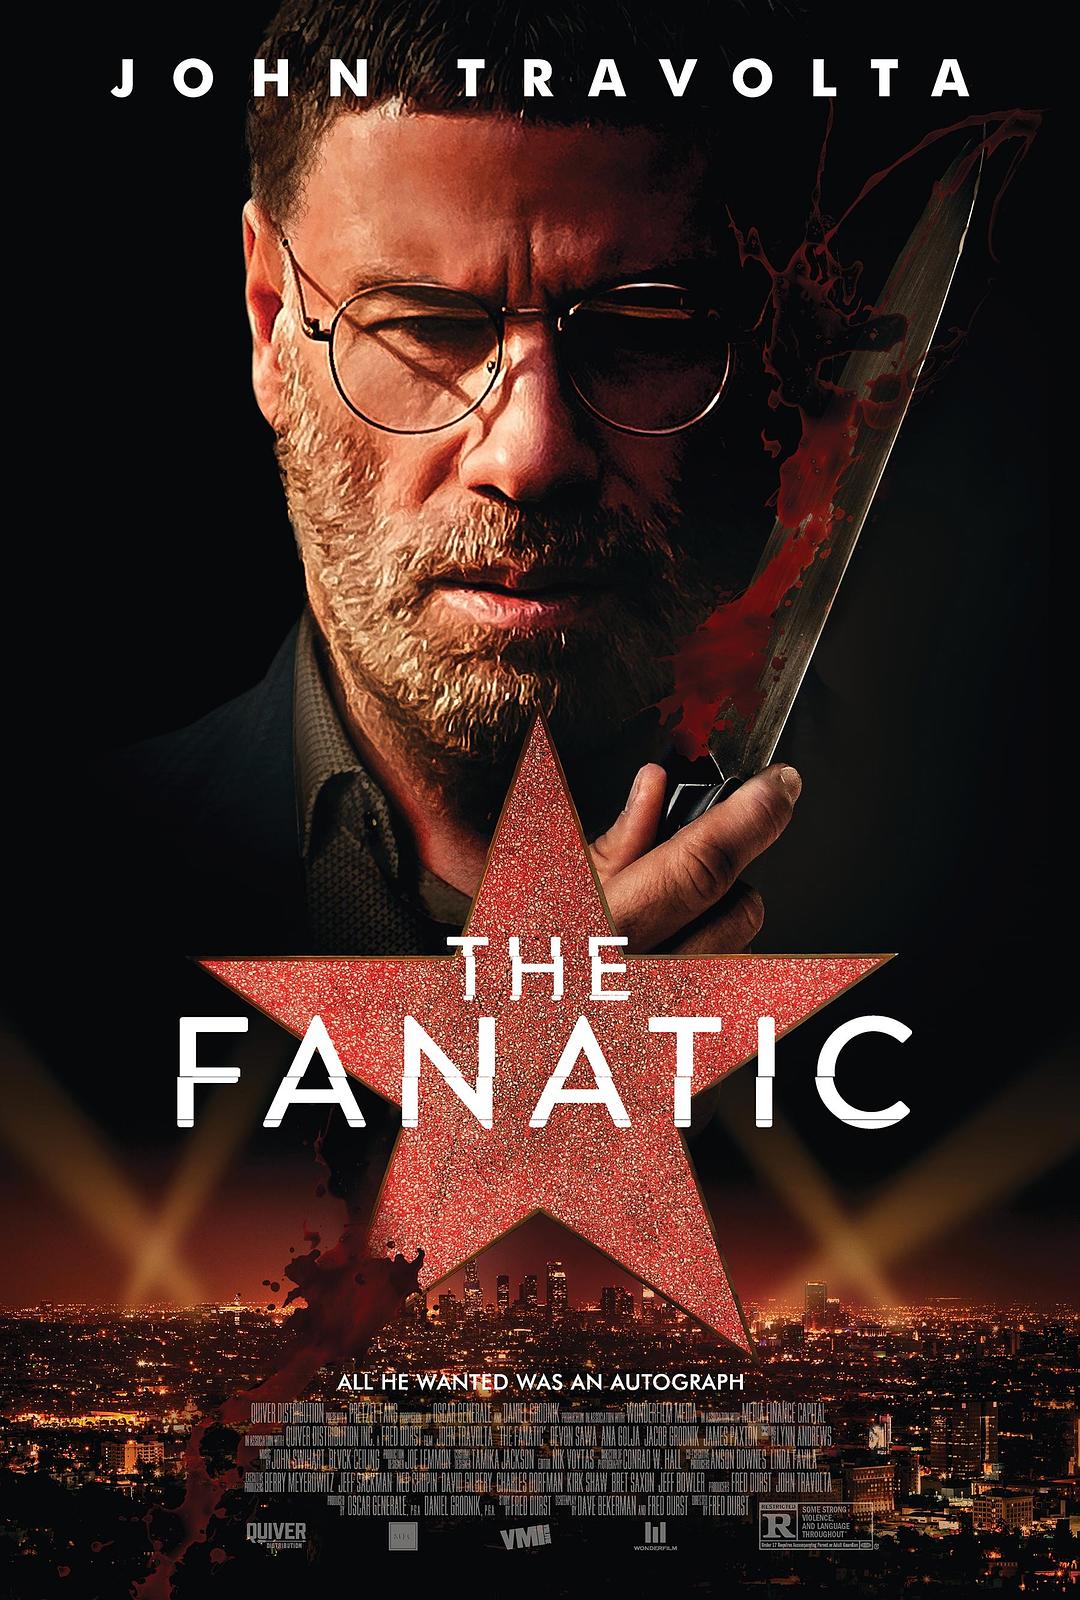  The.Fanatic.2019.1080p.BluRay.REMUX.AVC.DD5.1-FGT 14.89GB-1.png